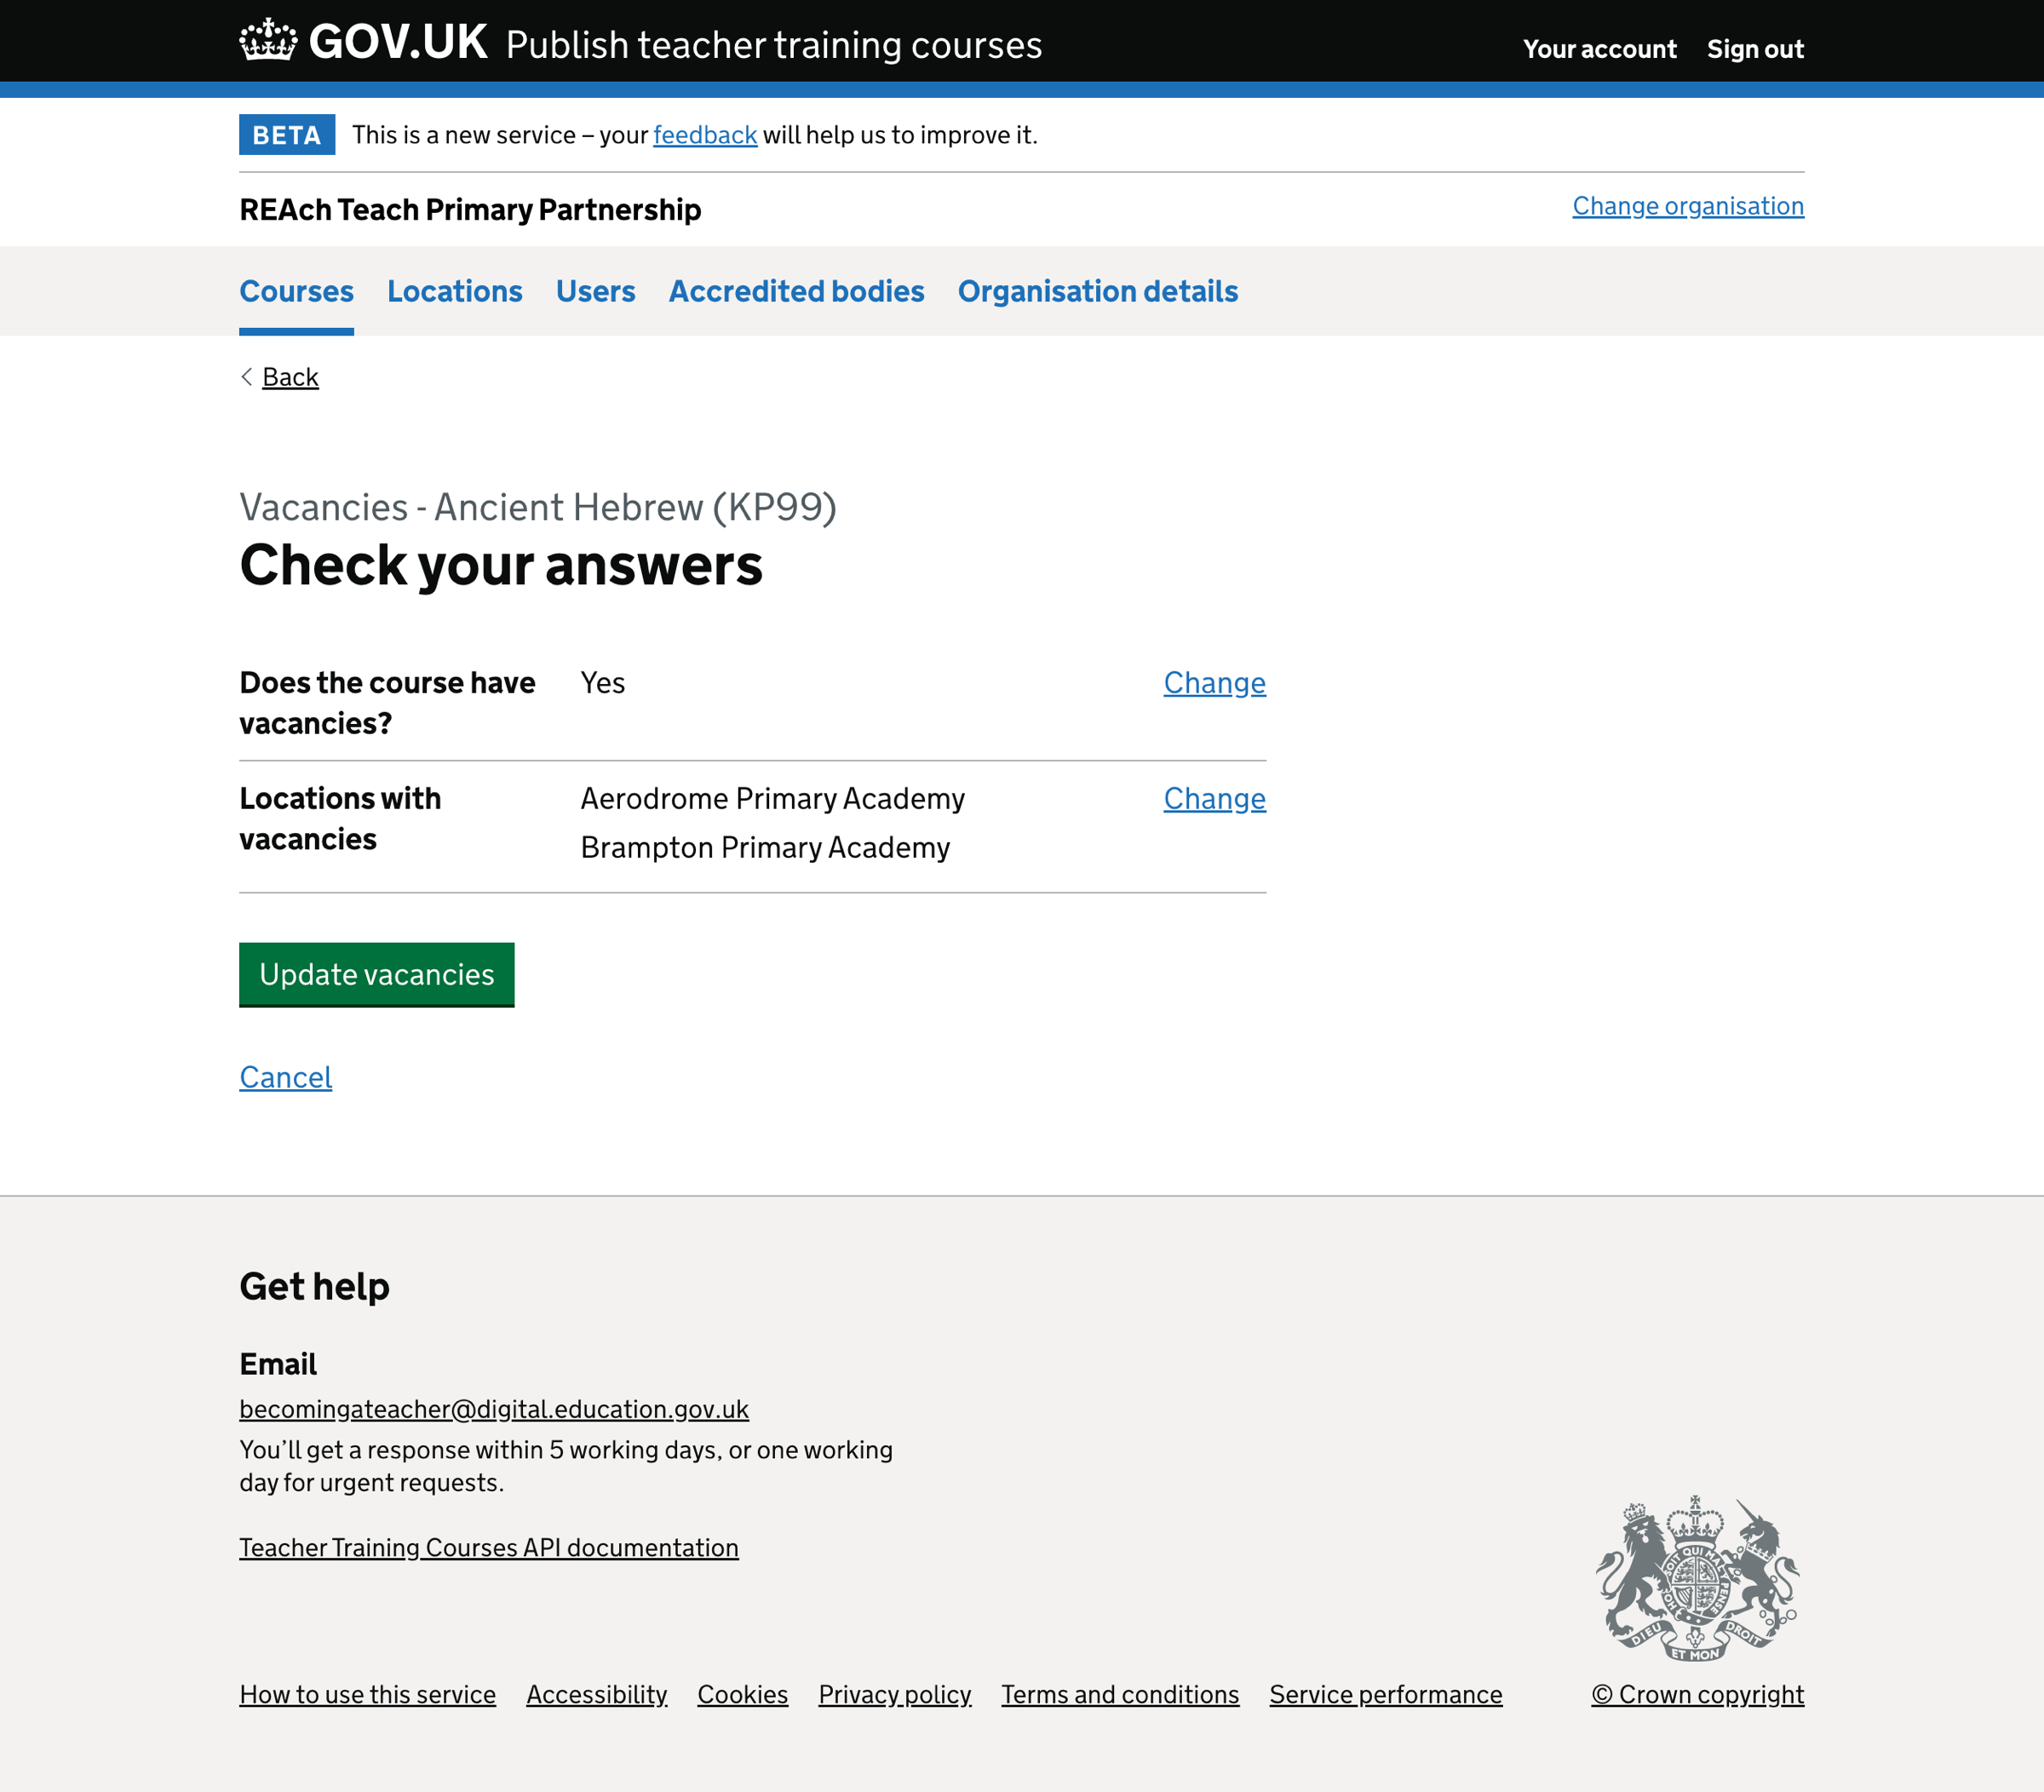 Screenshot of Check your answers - courses with vacancies